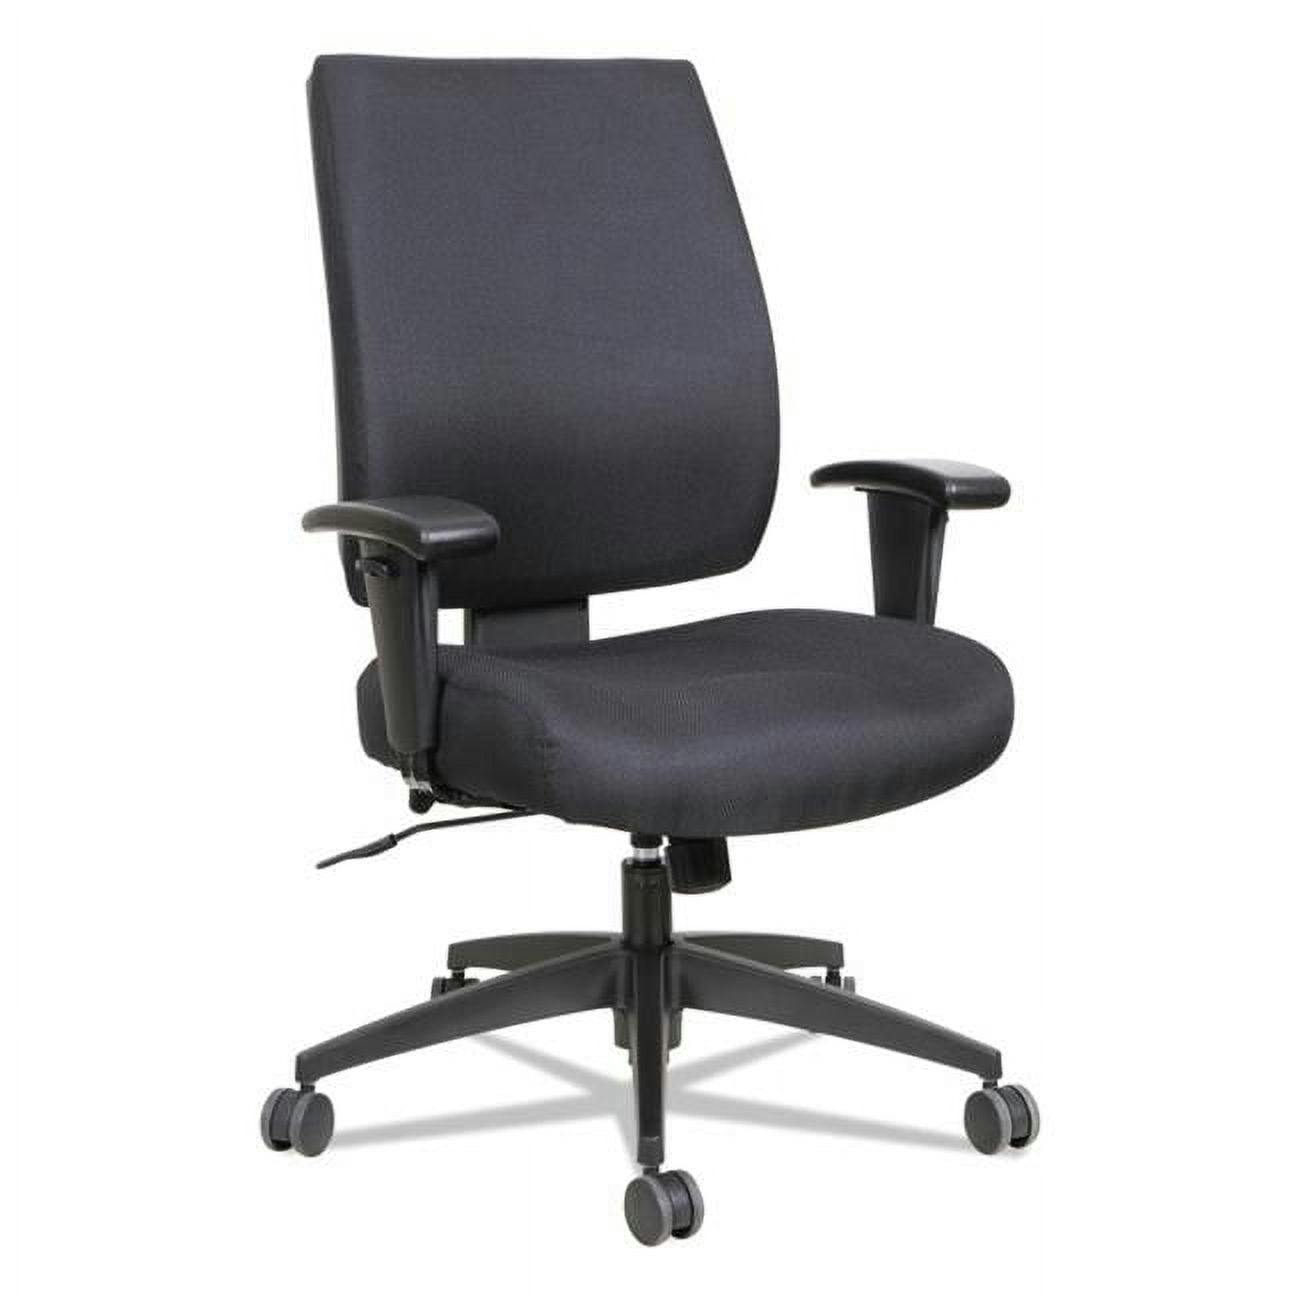 High-Performance Black Fabric Mid-Back Swivel Task Chair with Adjustable Arms